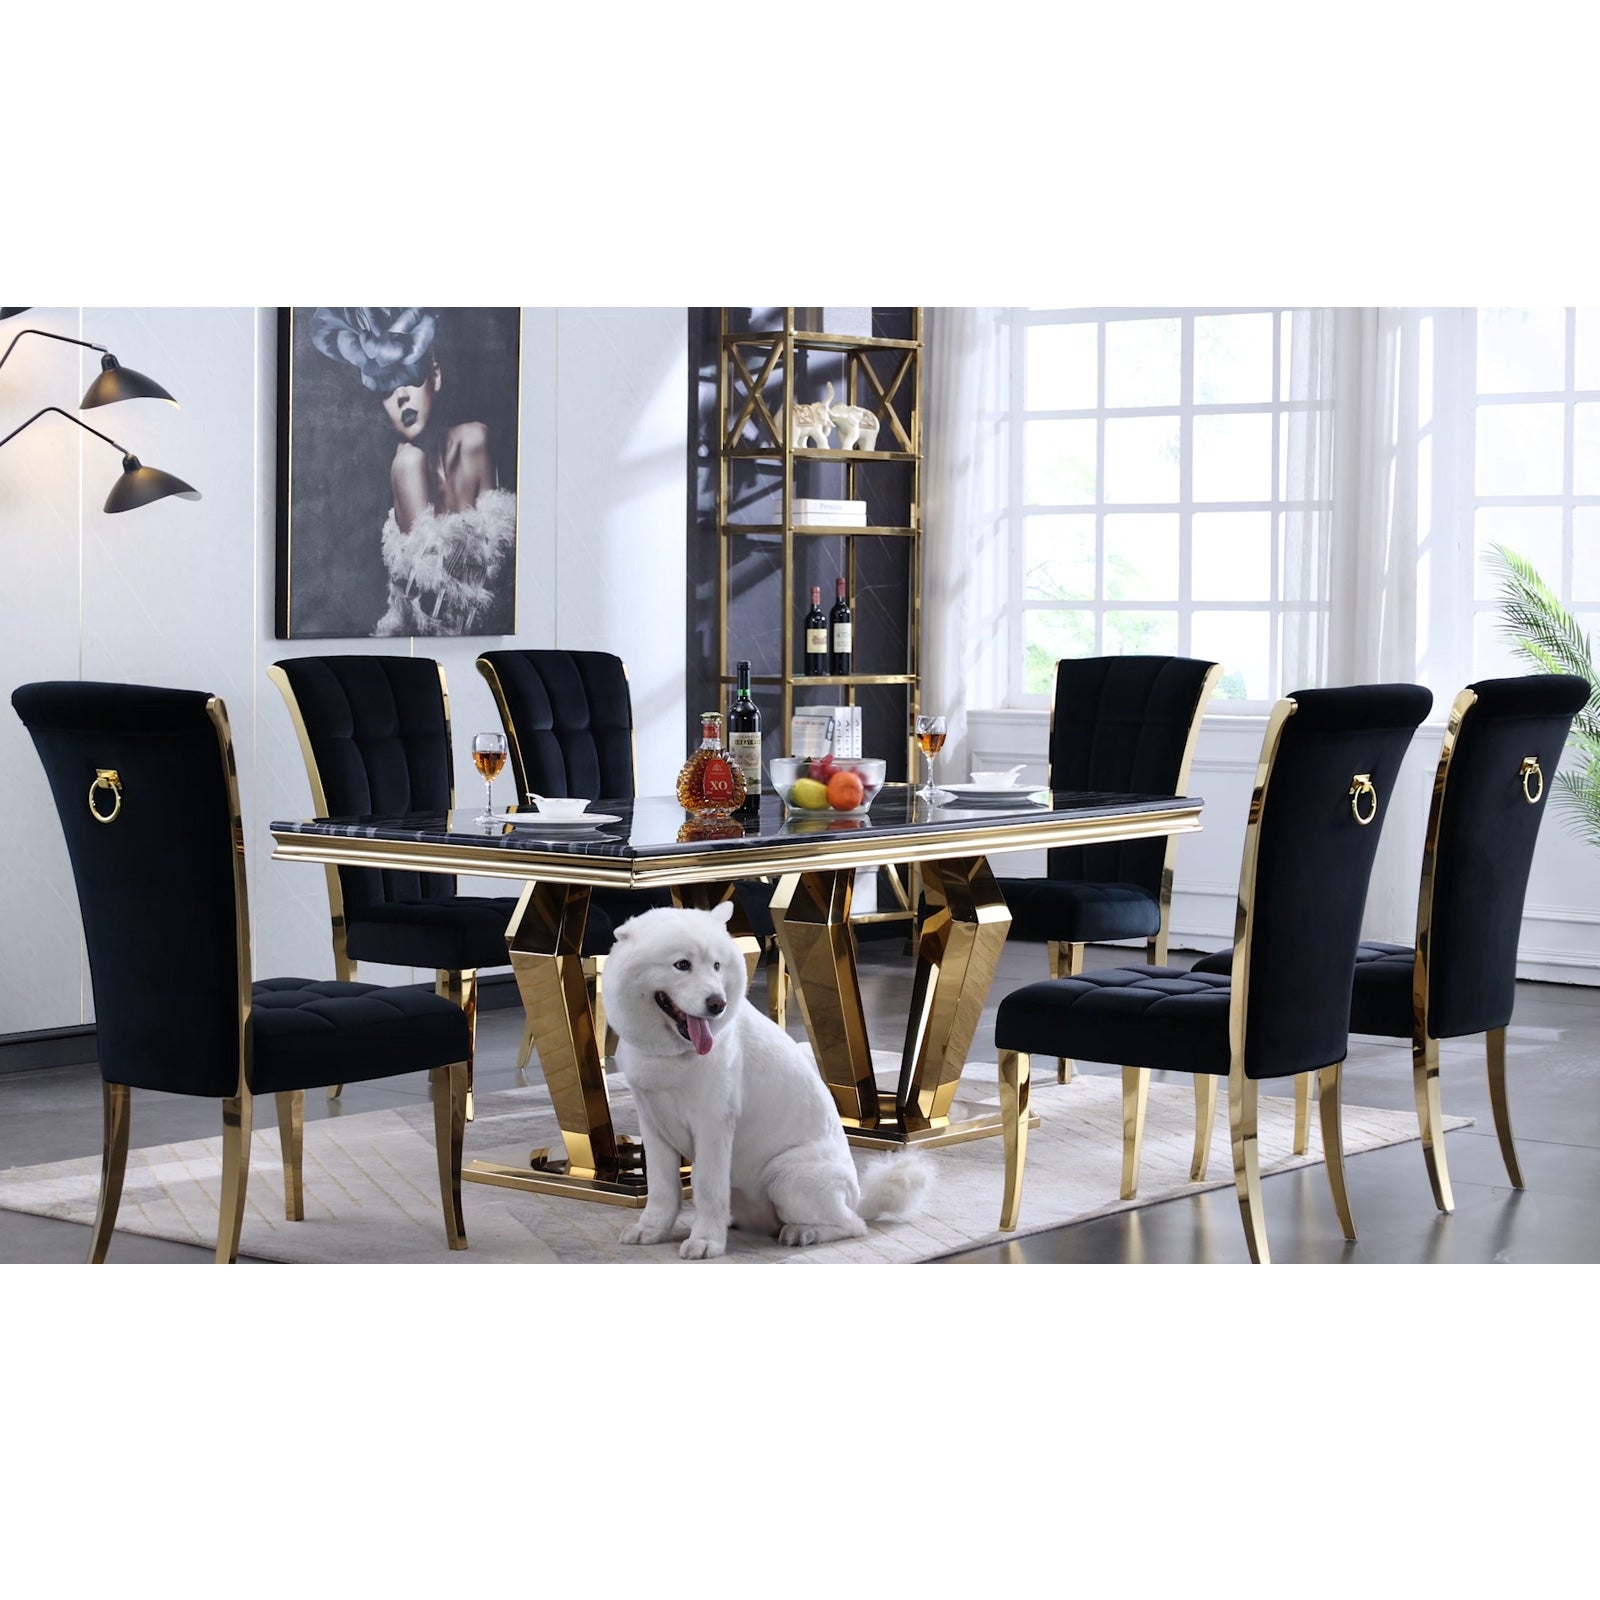 Dining table for 8 people | 78" Black Top | Metal Four geometric legs | T209